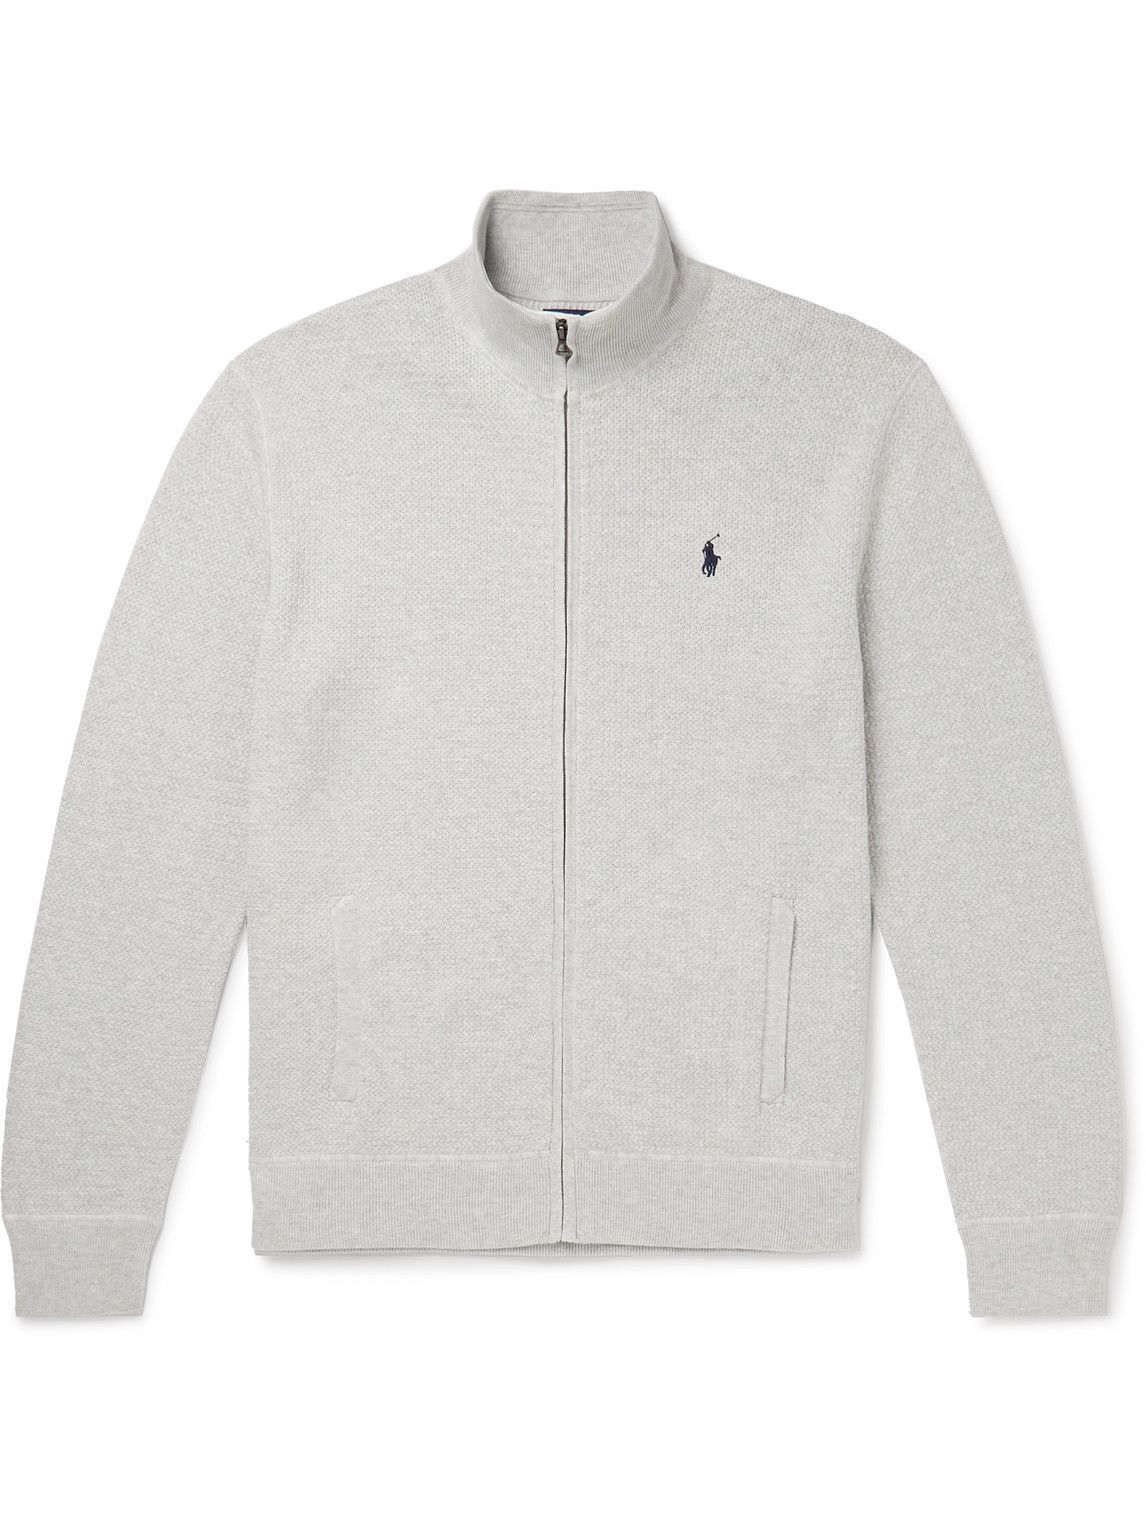 Polo Ralph Lauren - Logo-Embroidered Cotton Zip-Up Sweater - Gray